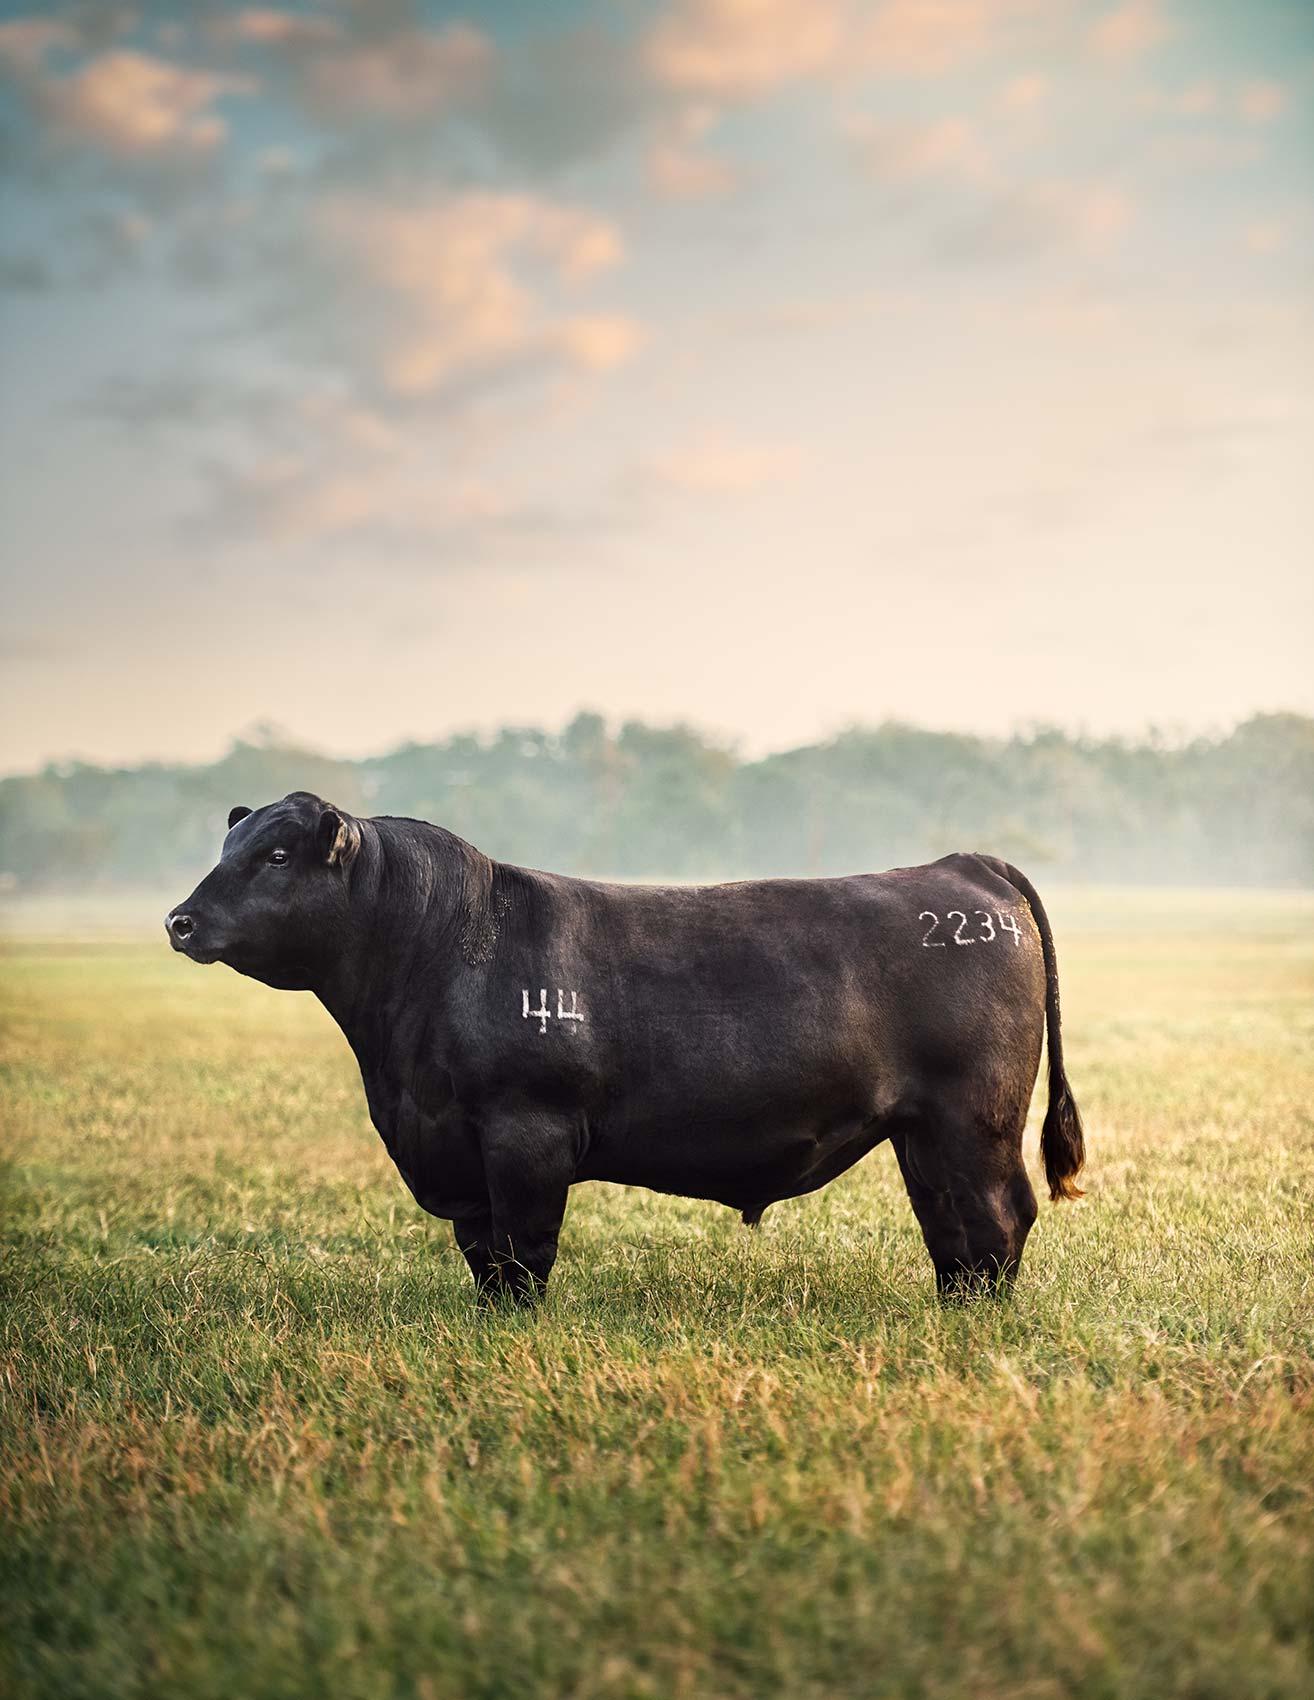 Randal Ford - True Bull at Dawn, Photography 2023, Printed After